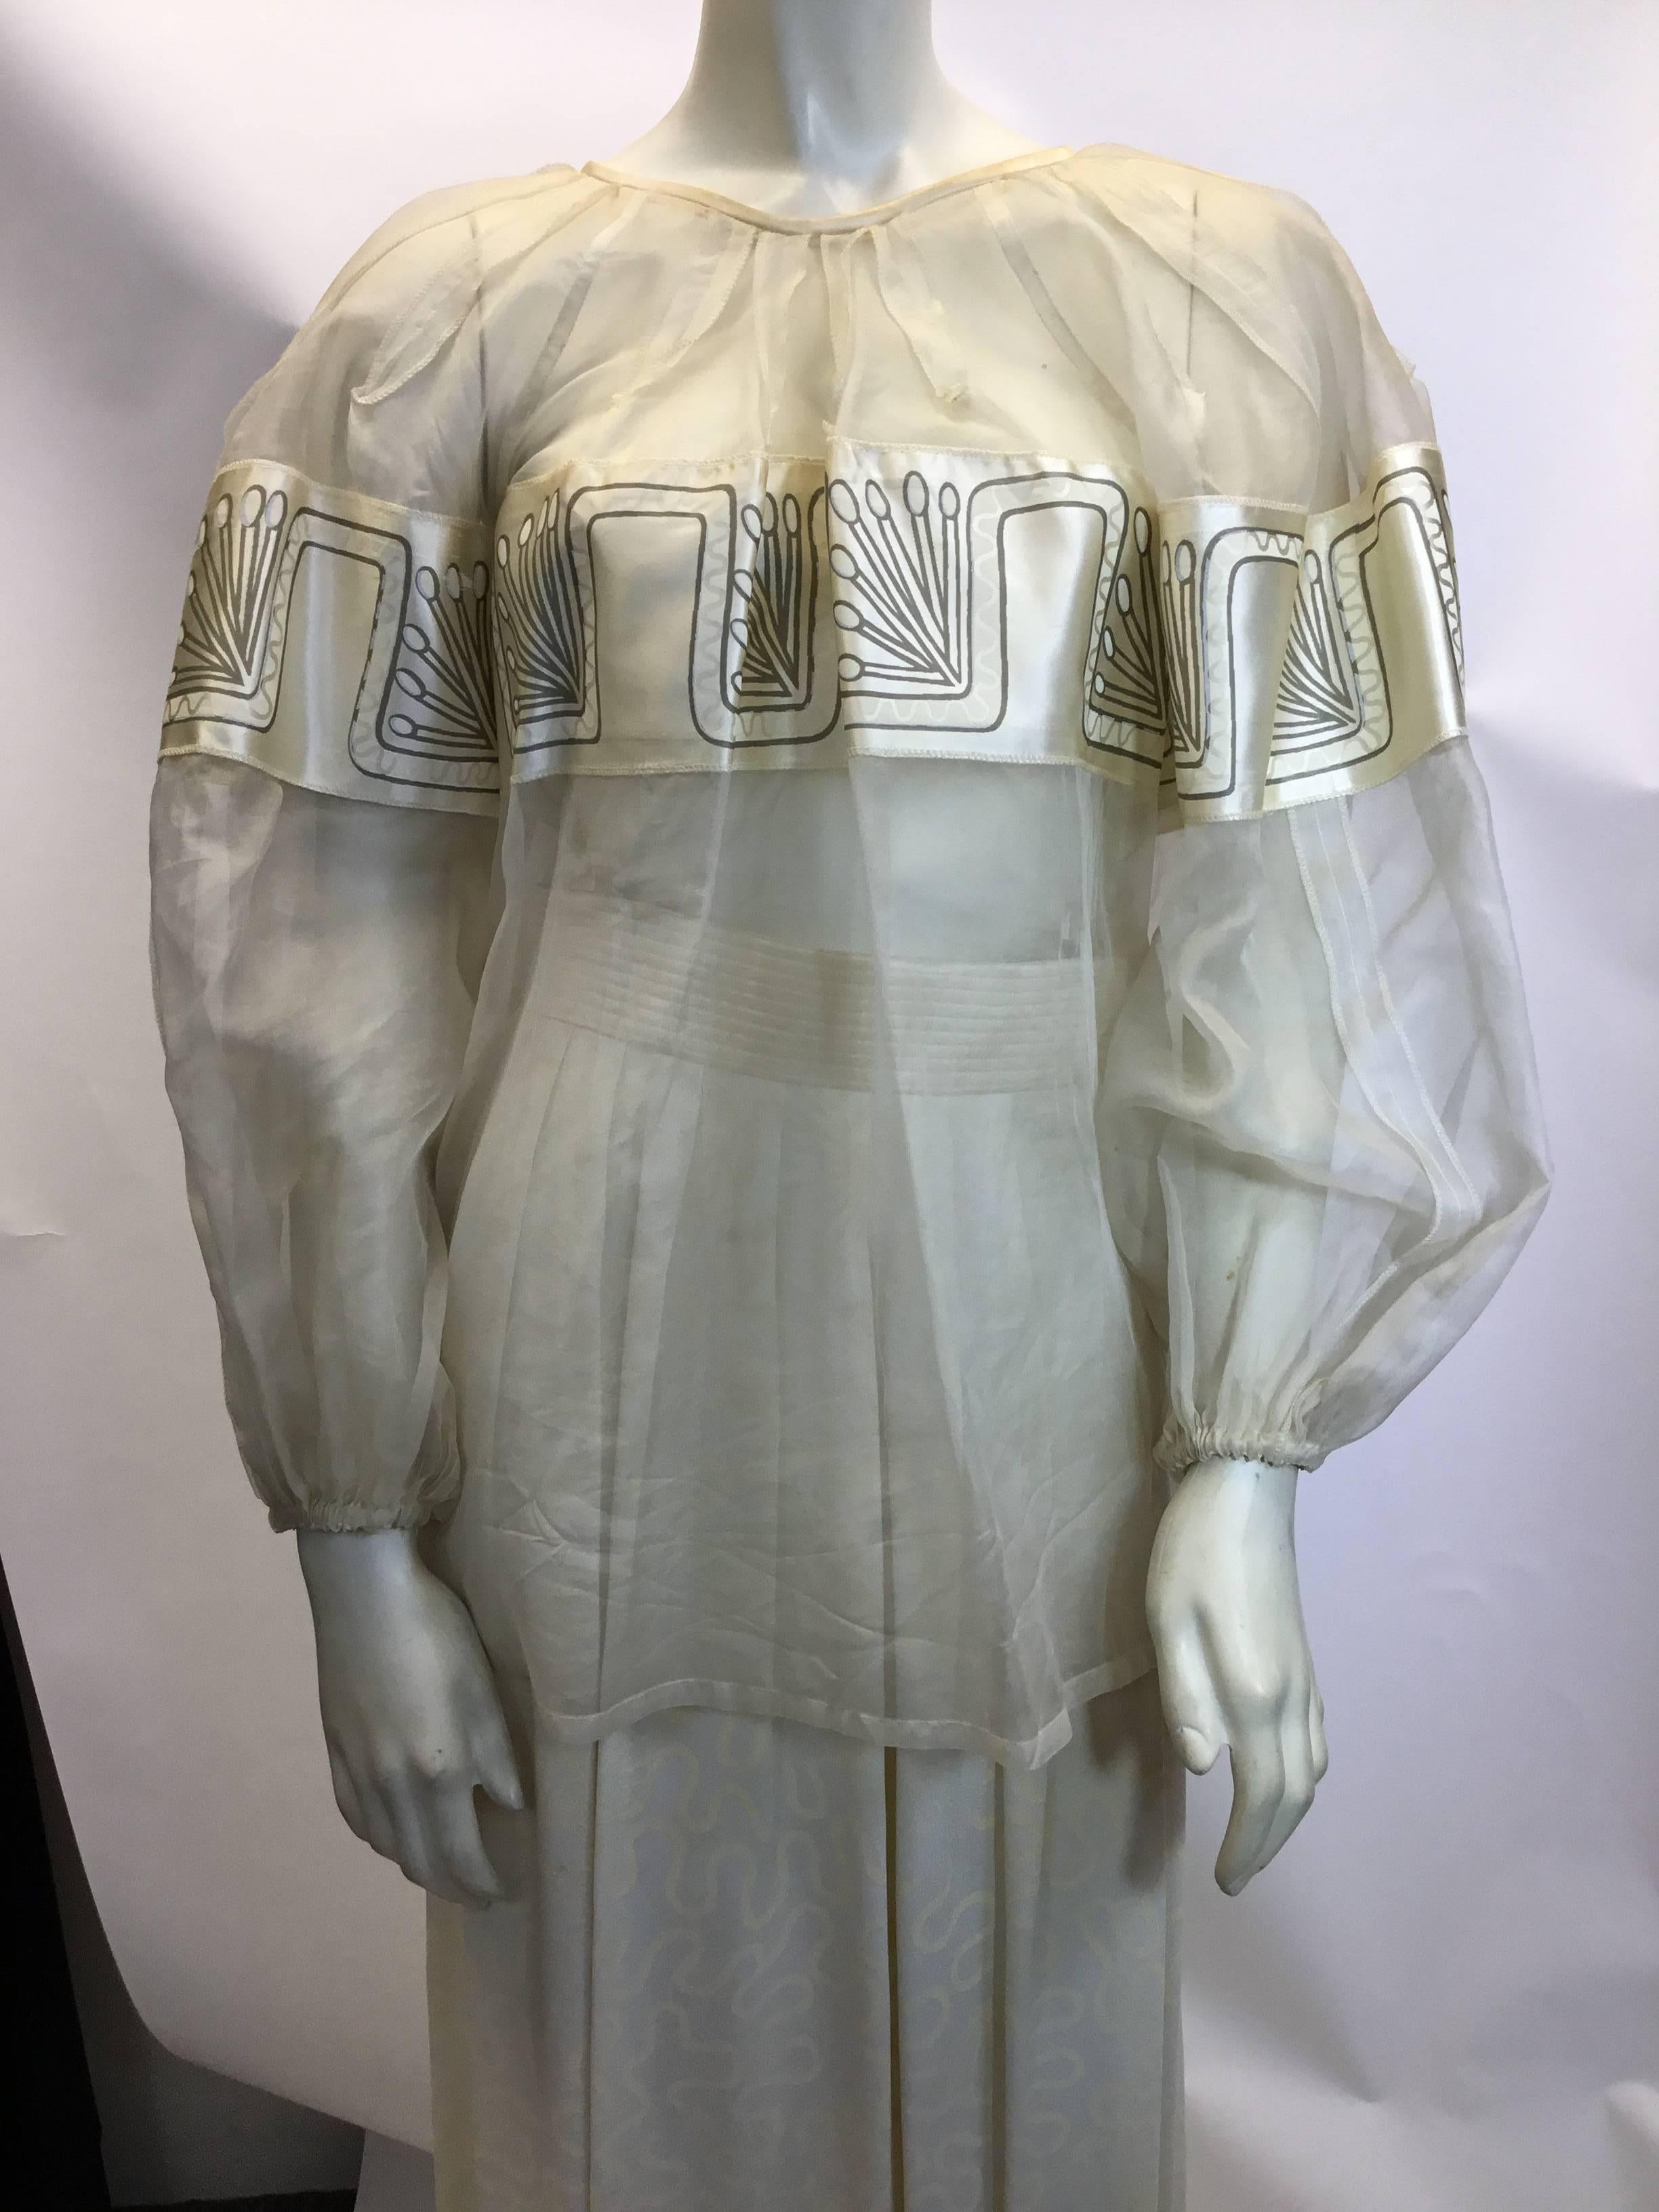 Zanda Rhodes Vintage Cream Silk 2 Piece Skirt Set 
Size 10 petite
Made in England
$199
A few small stains on the top, see photos